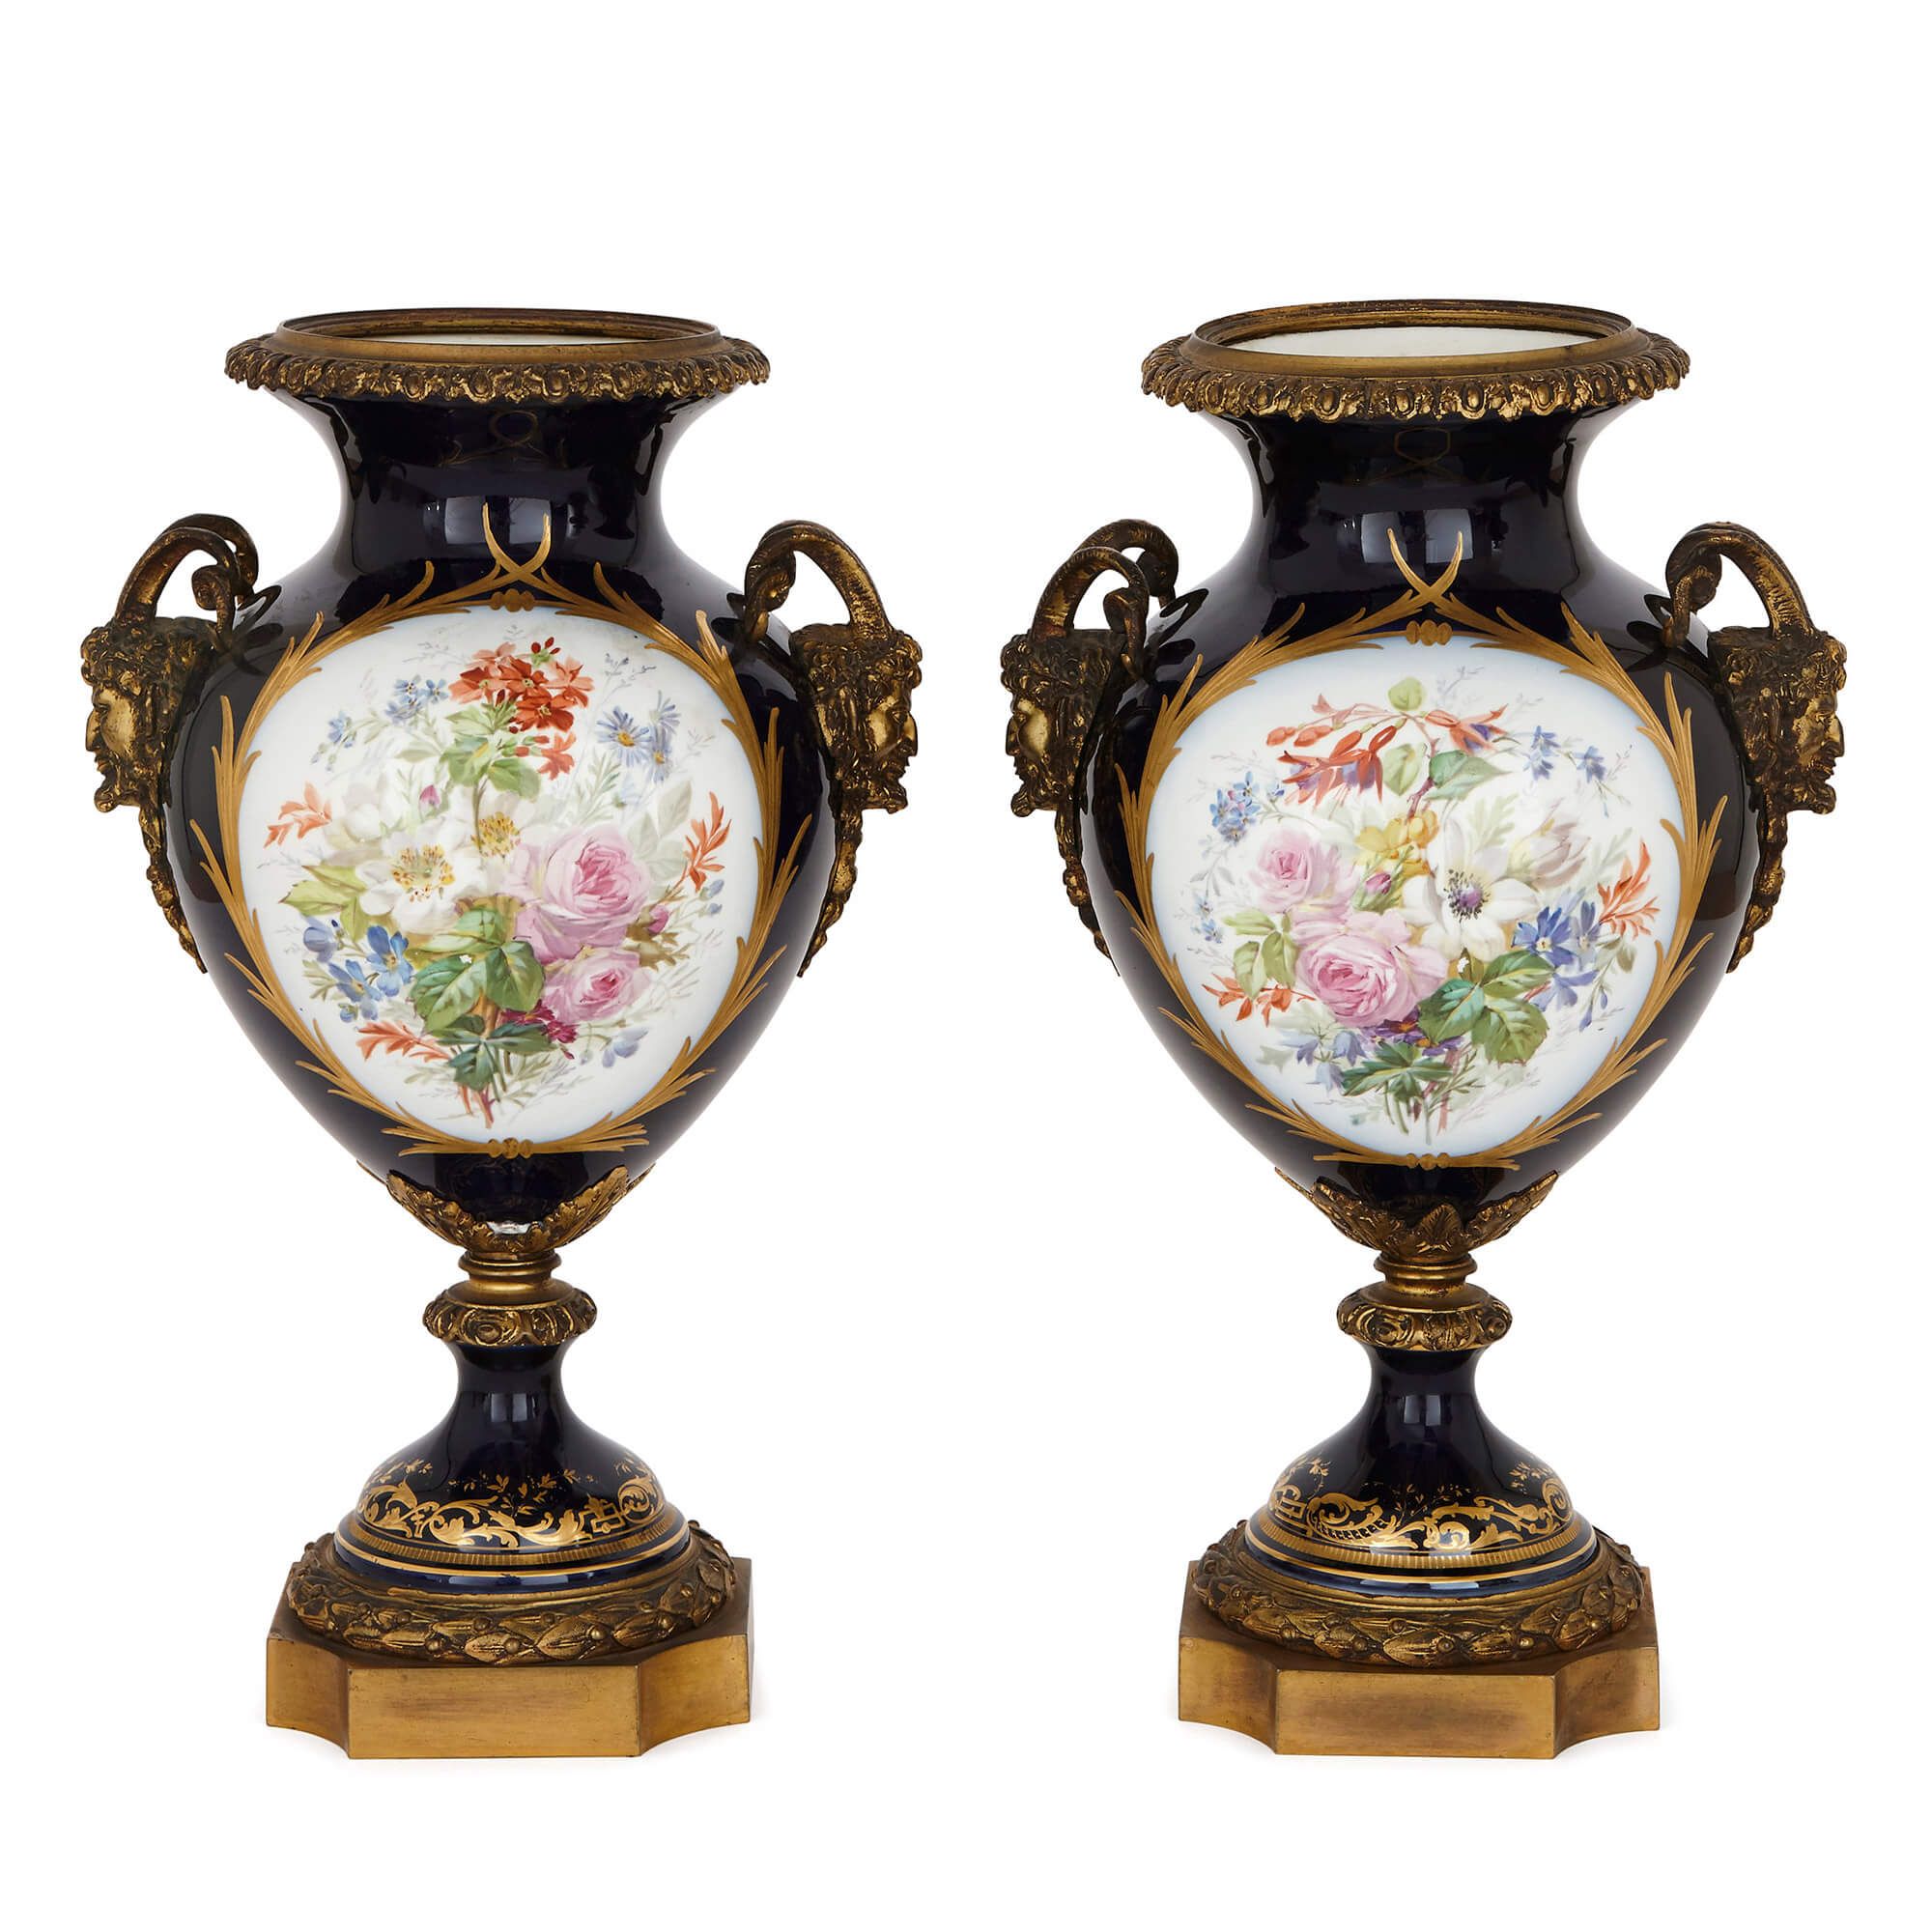 Antique French Sevres style porcelain and ormolu clock set | Mayfair ...